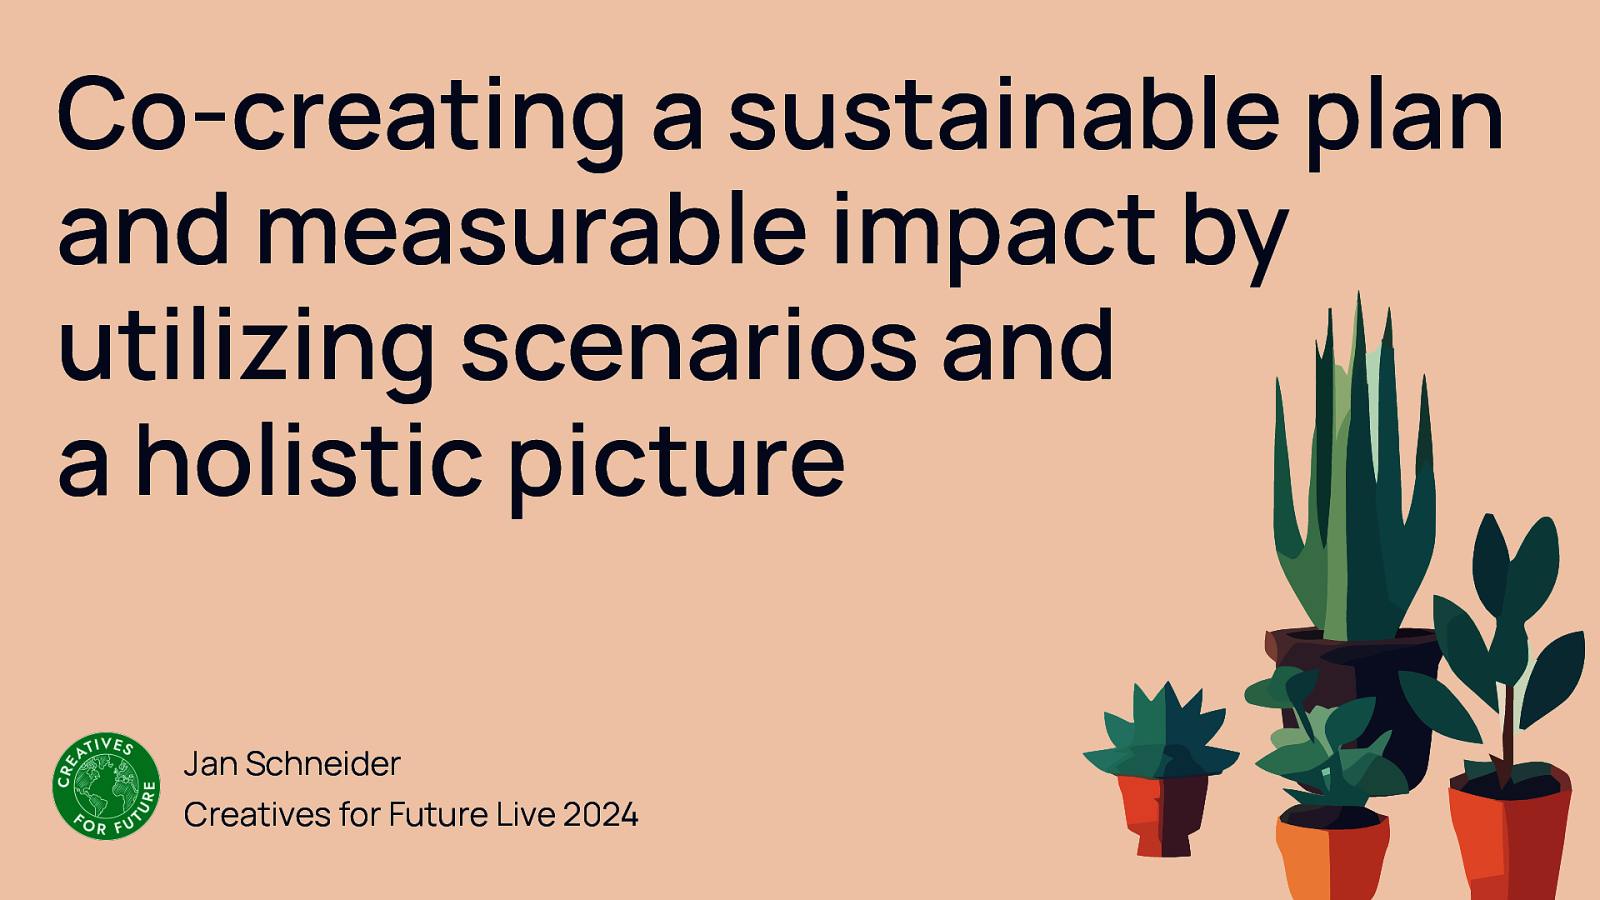 Co-creating a sustainable plan and measurable impact by utilizing scenarios and a holistic picture